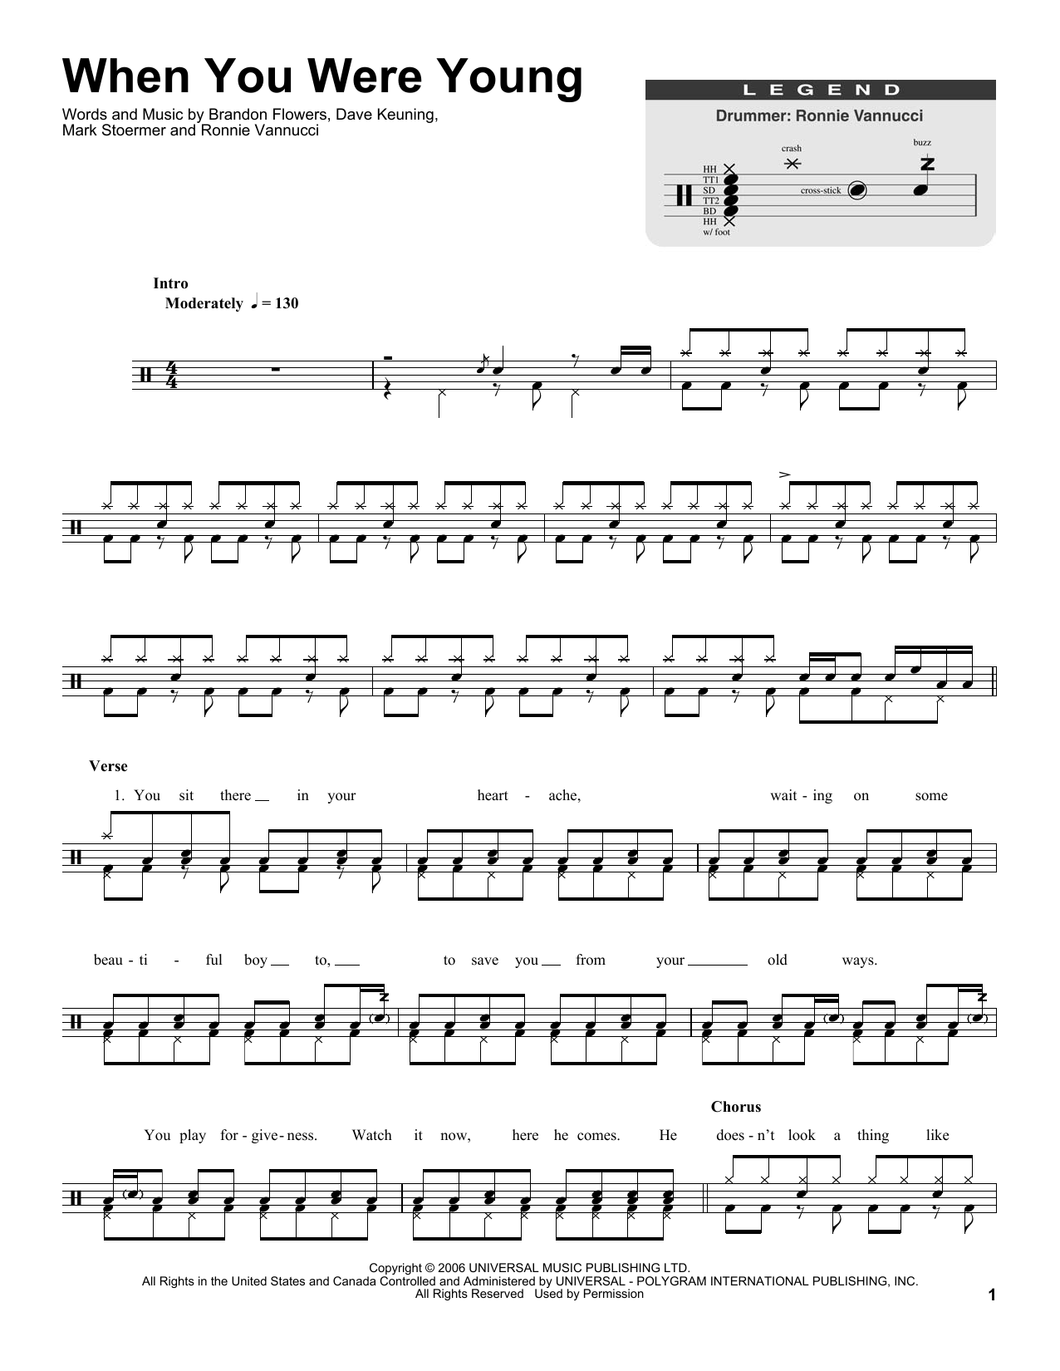 When You Were Young - The Killers - Full Drum Transcription / Drum Sheet Music - SheetMusicDirect DT174825